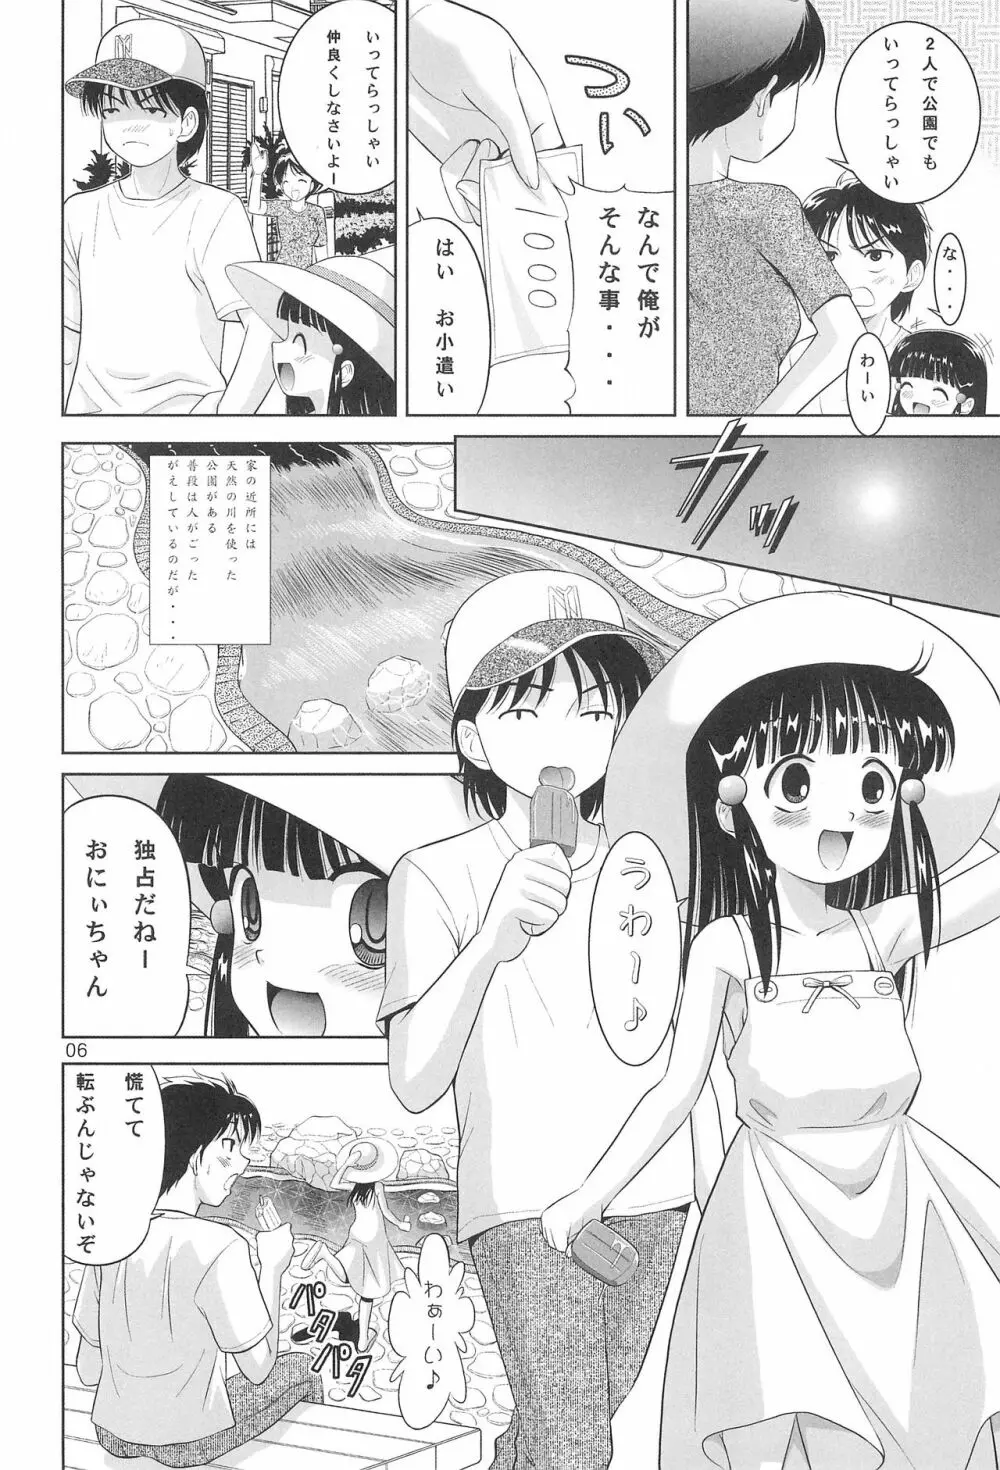 Little Lovers 6 - 水辺の少女 Page.5